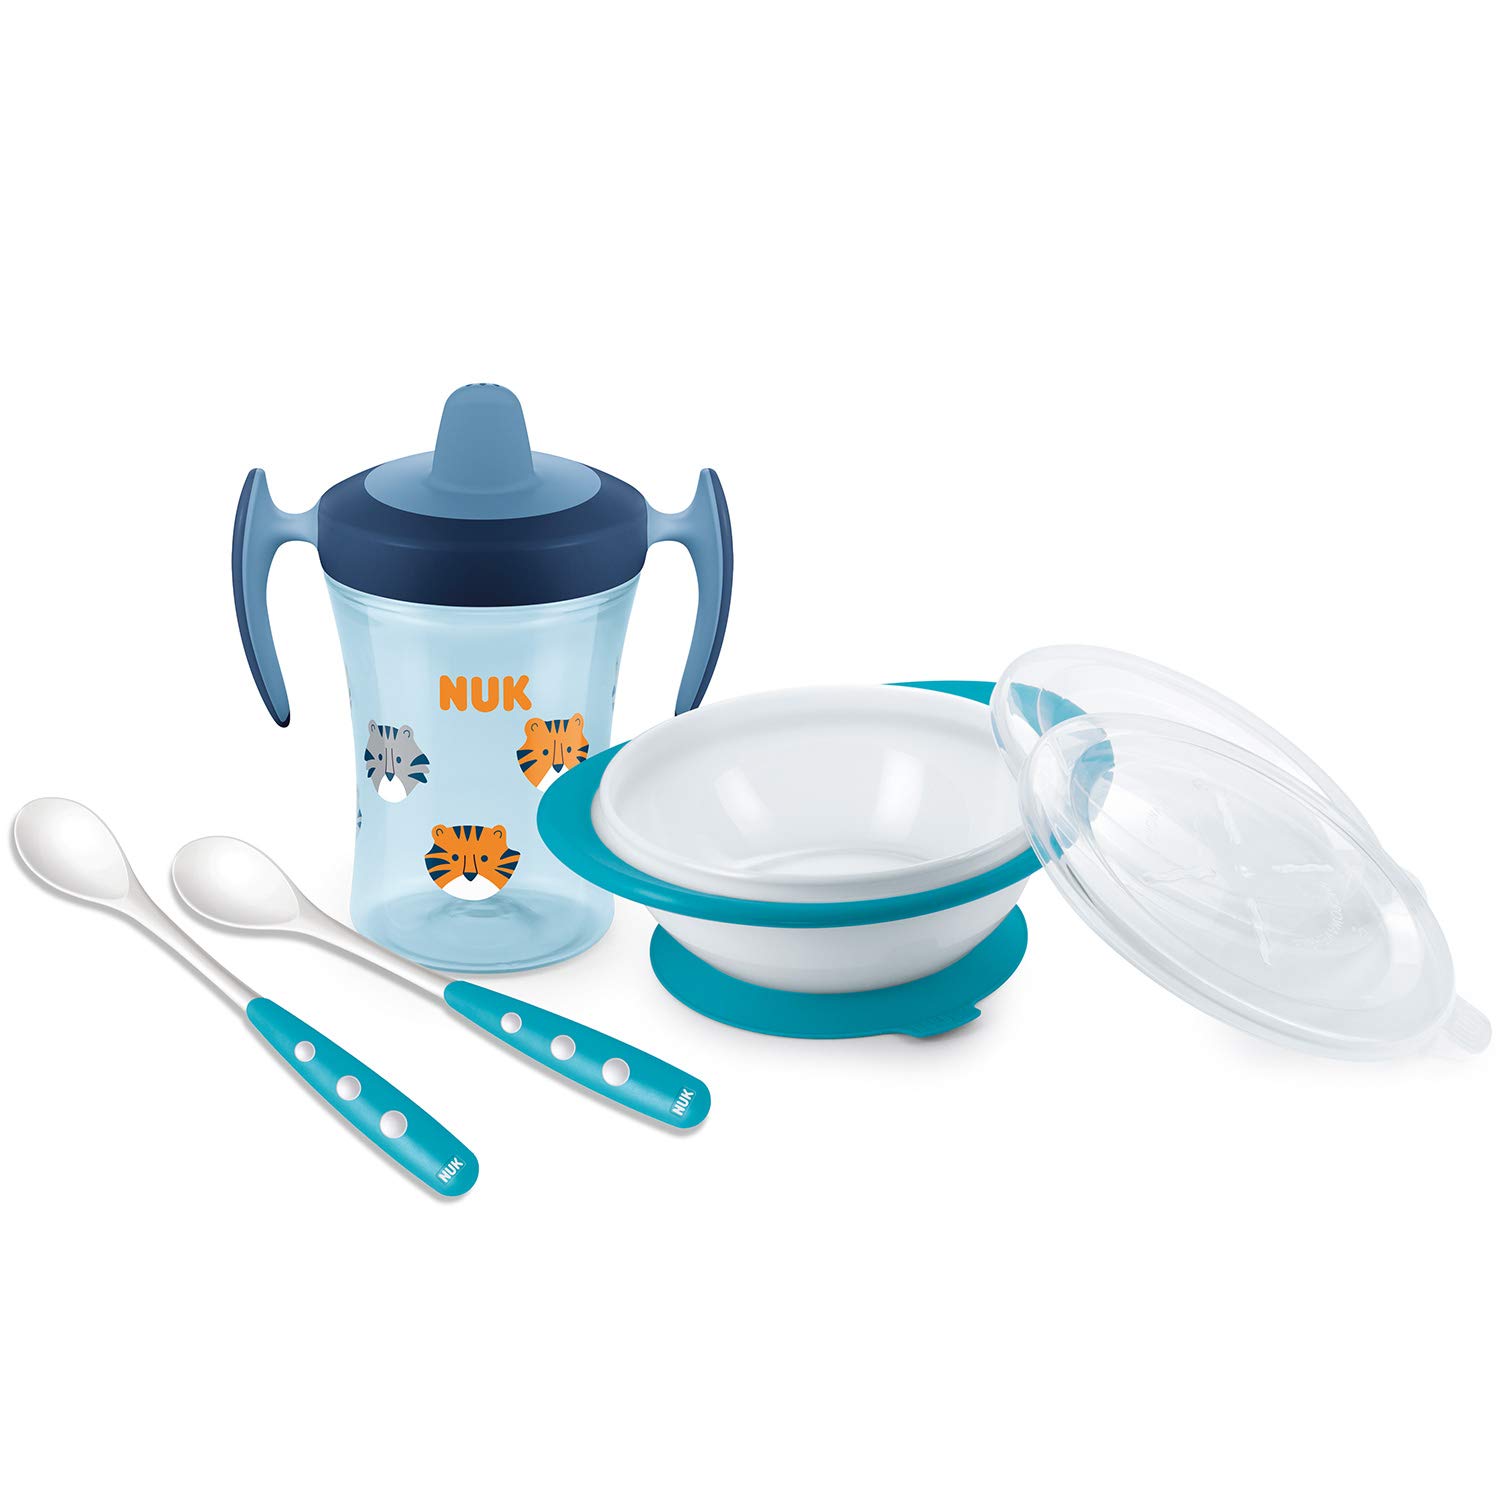 NUK Learning to Eat set with trainer cup Tiger Tiger (Blue)